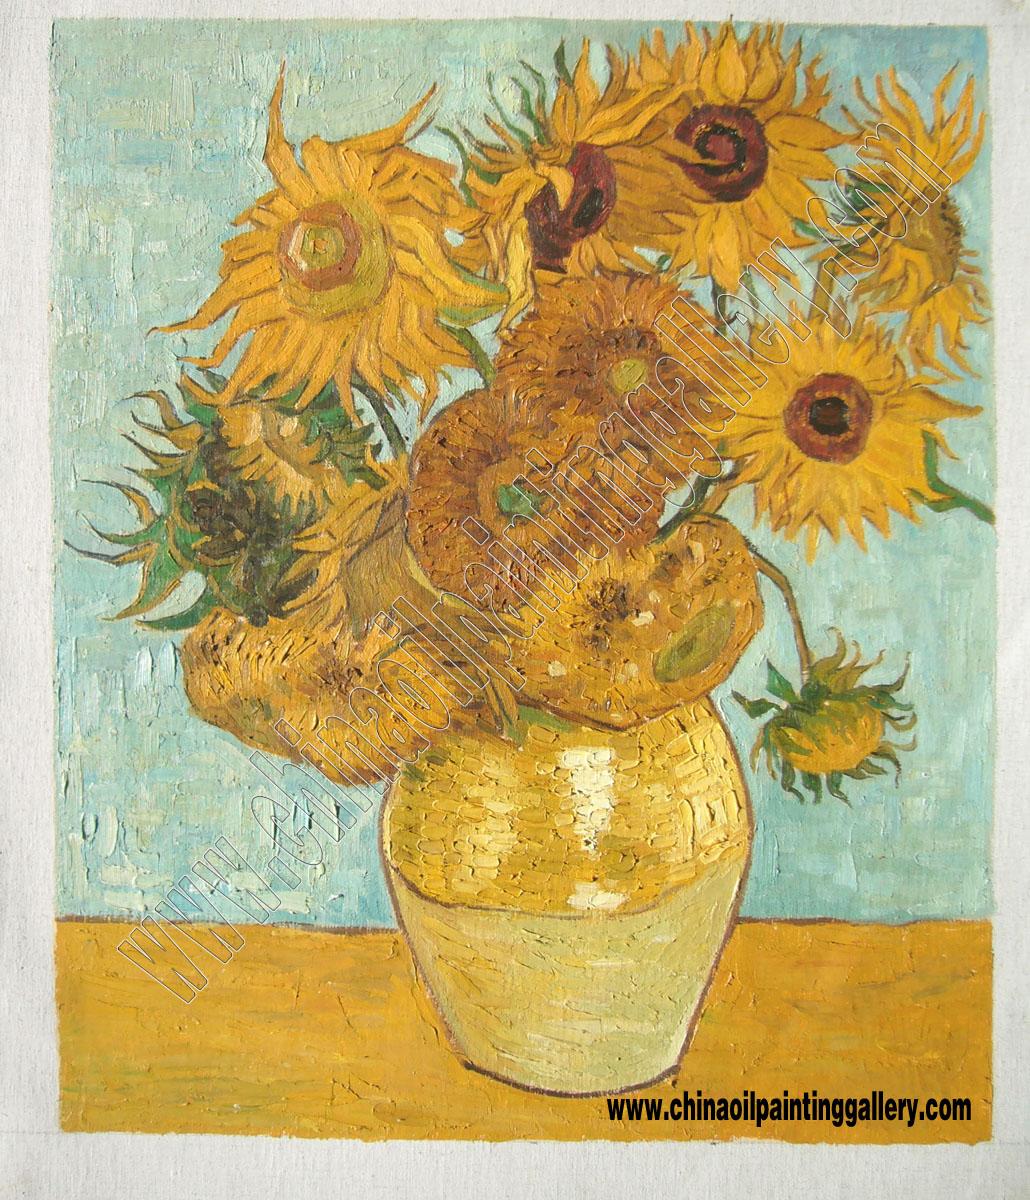 Vincent van Gogh Sunflowers - Oil painting reproductions 7